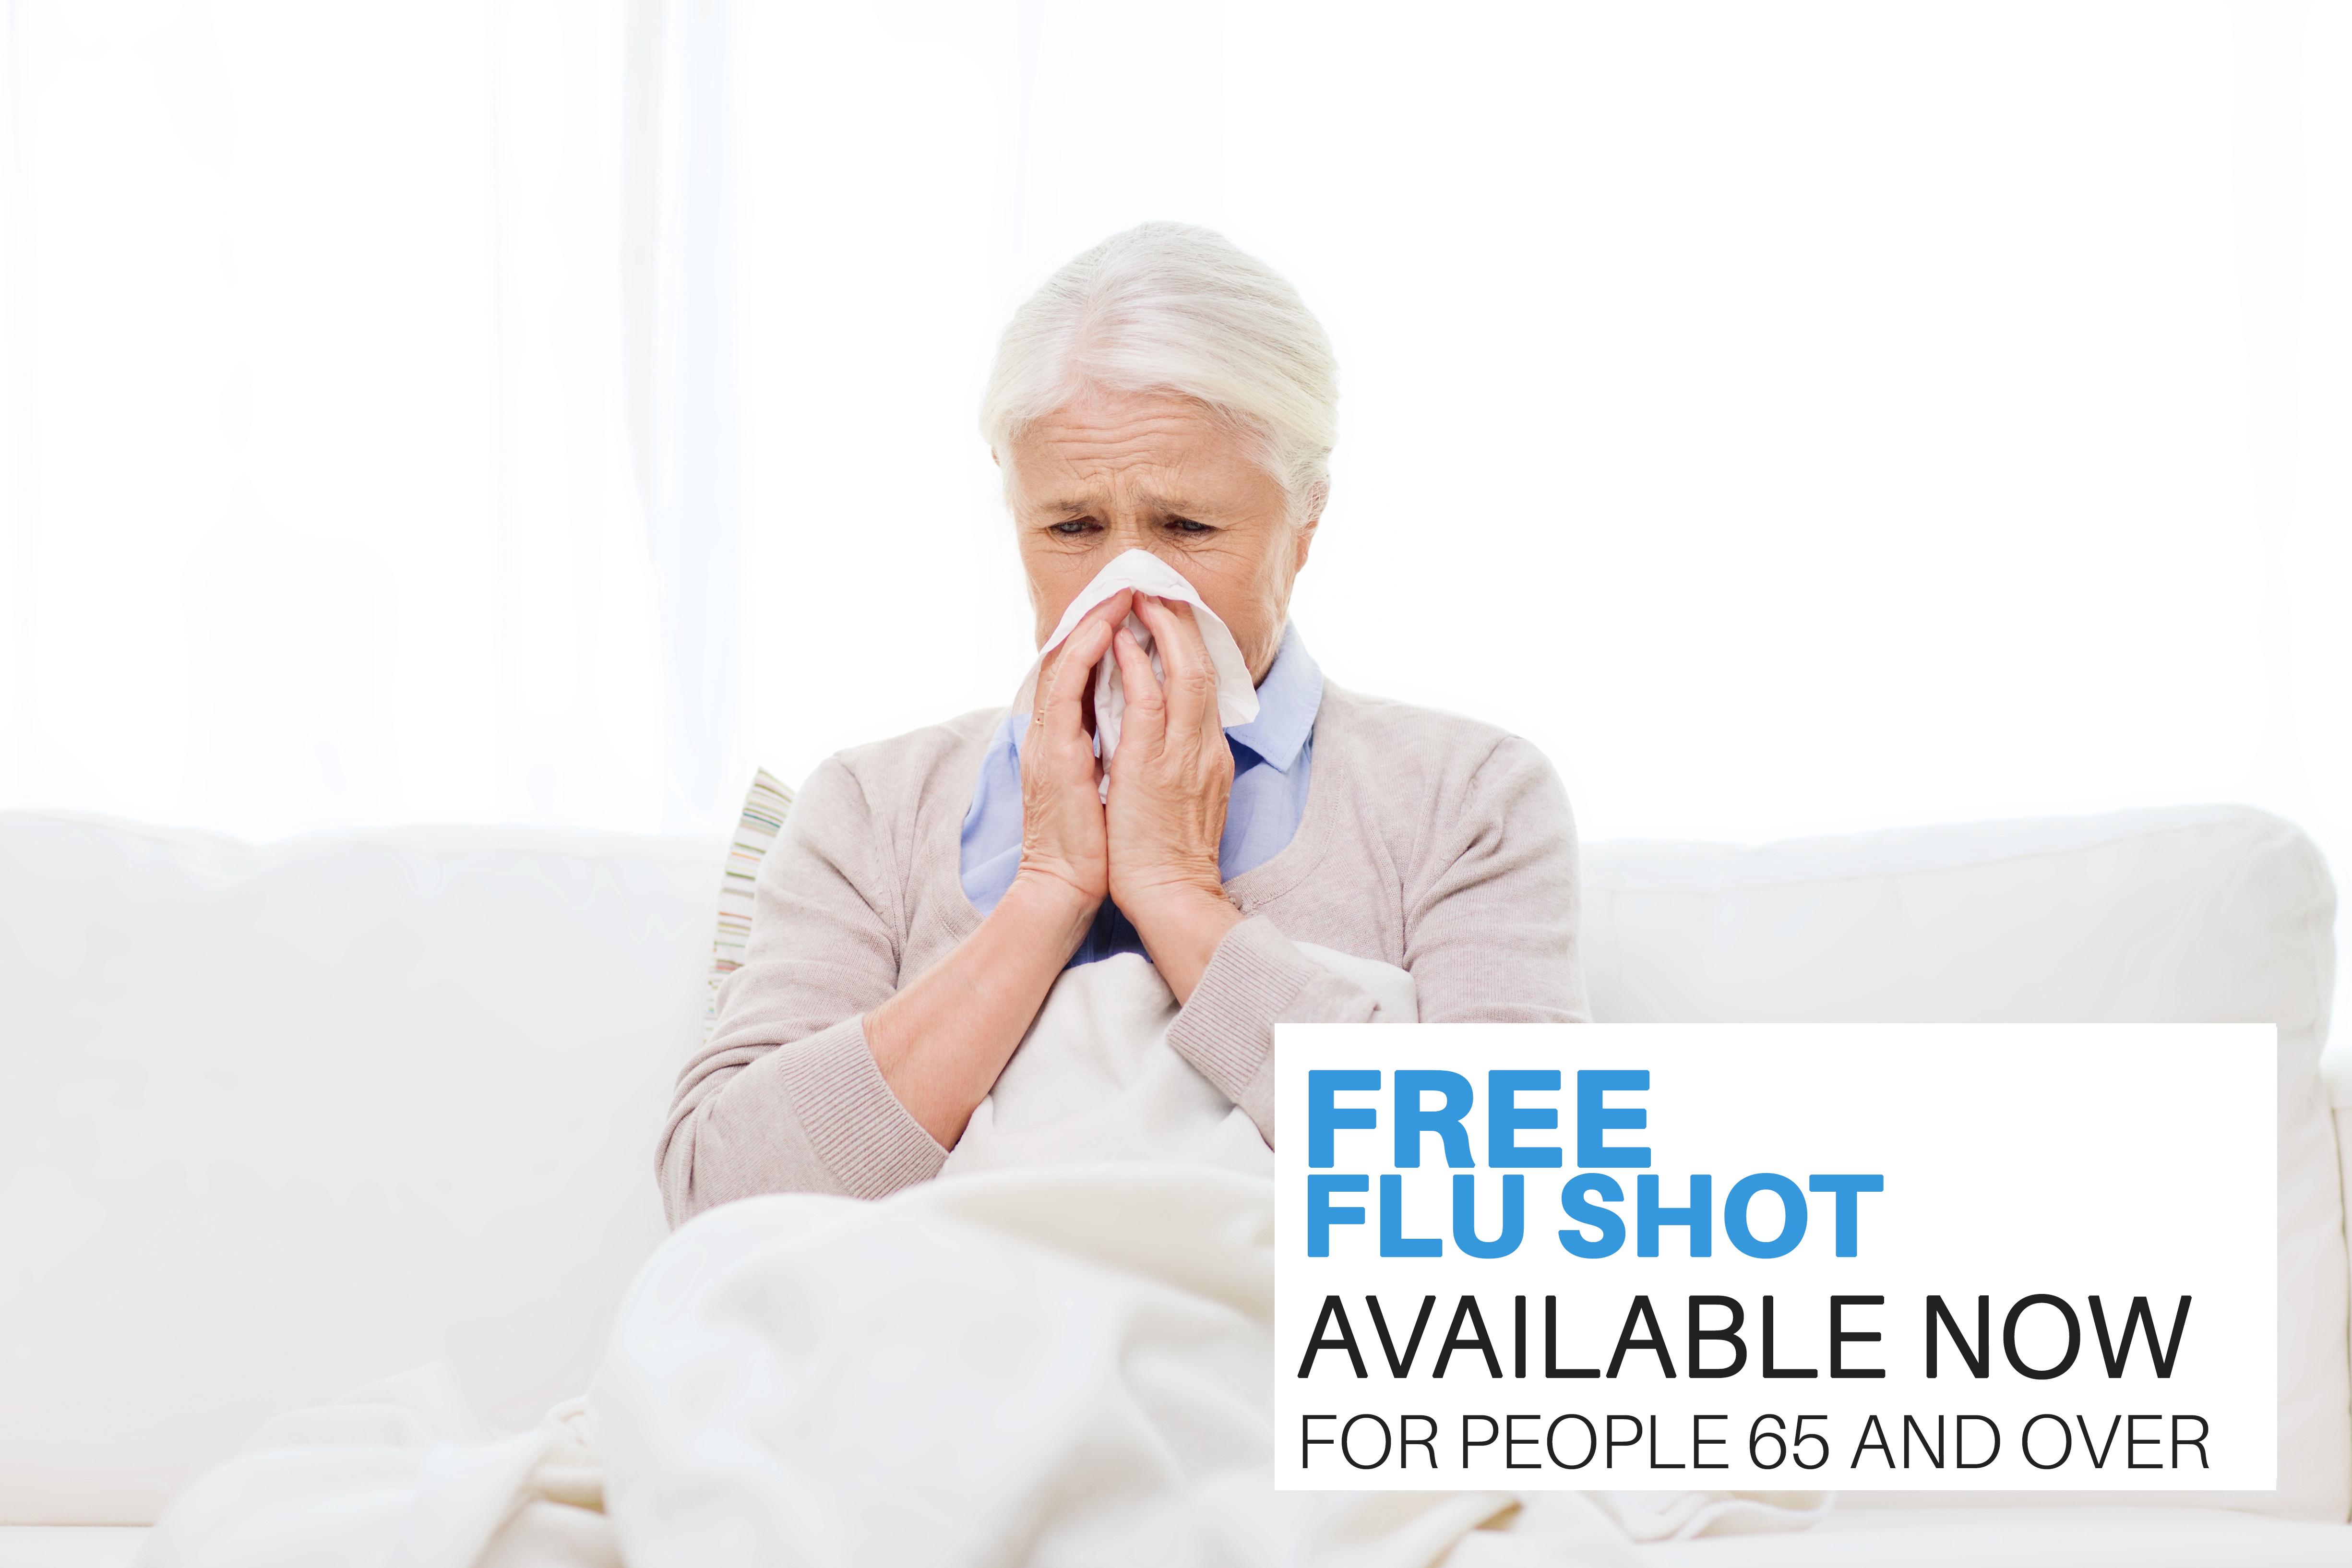 Flu shots for people 65 and over